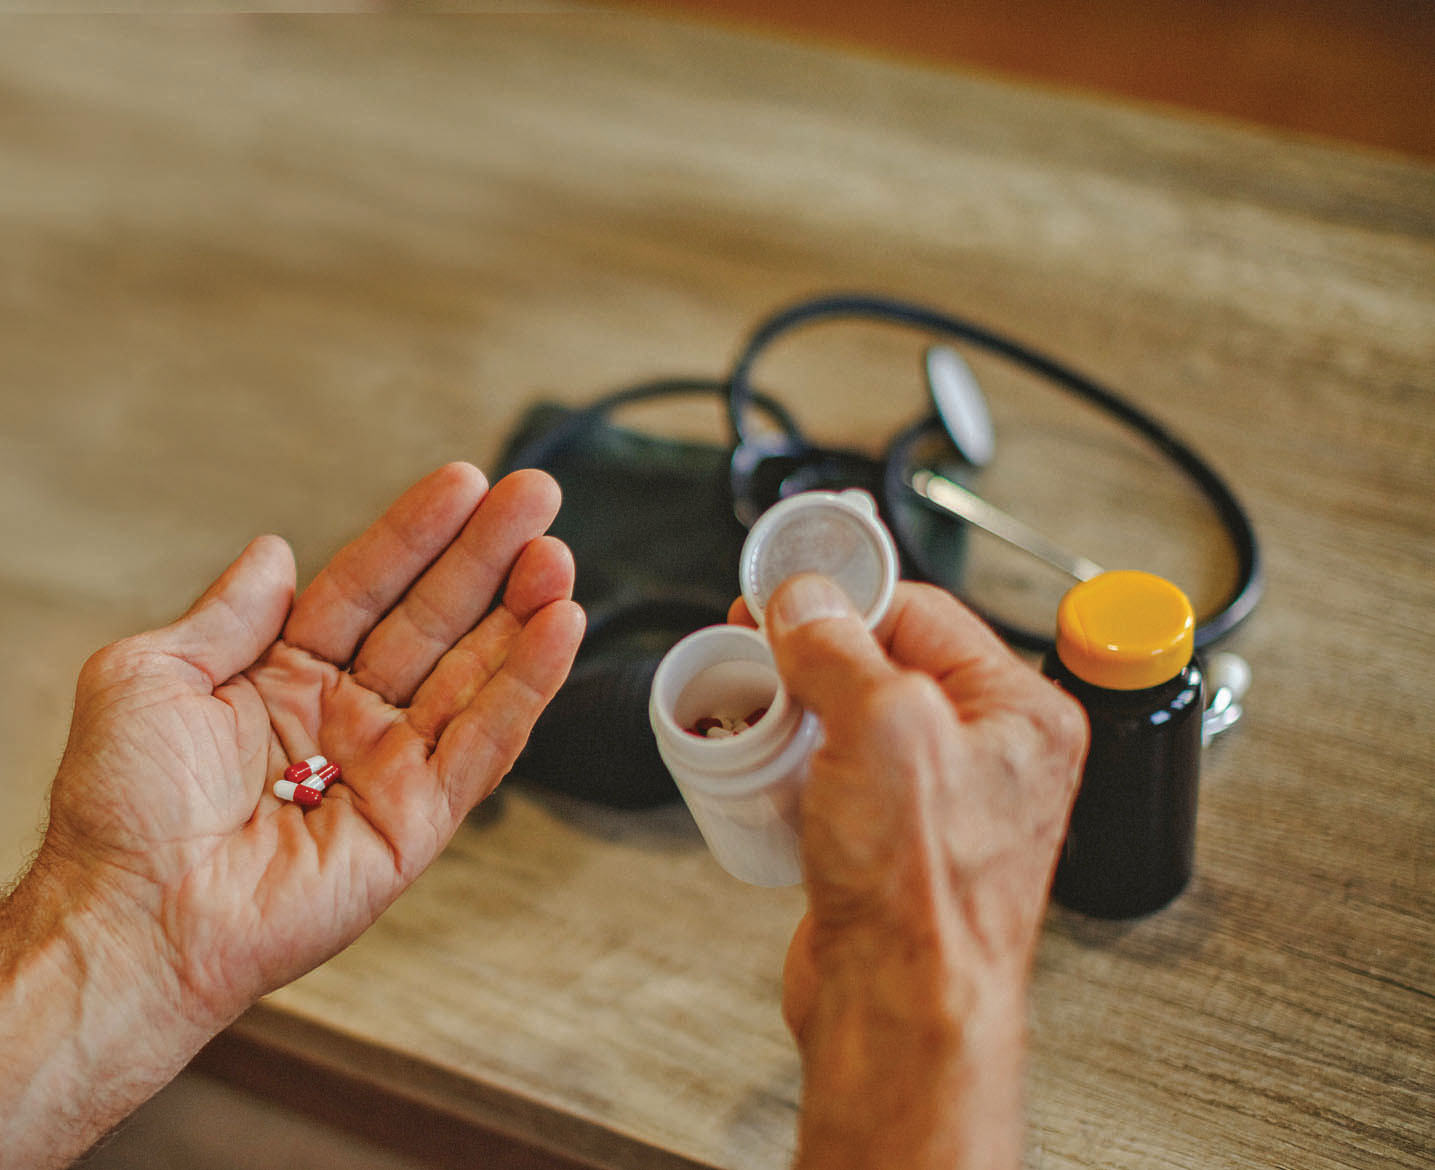 photo of the hands of an older man with acetaminophen capsules in the left hand and the medication bottle in the right, with a blood pressure cuff on a table in the background